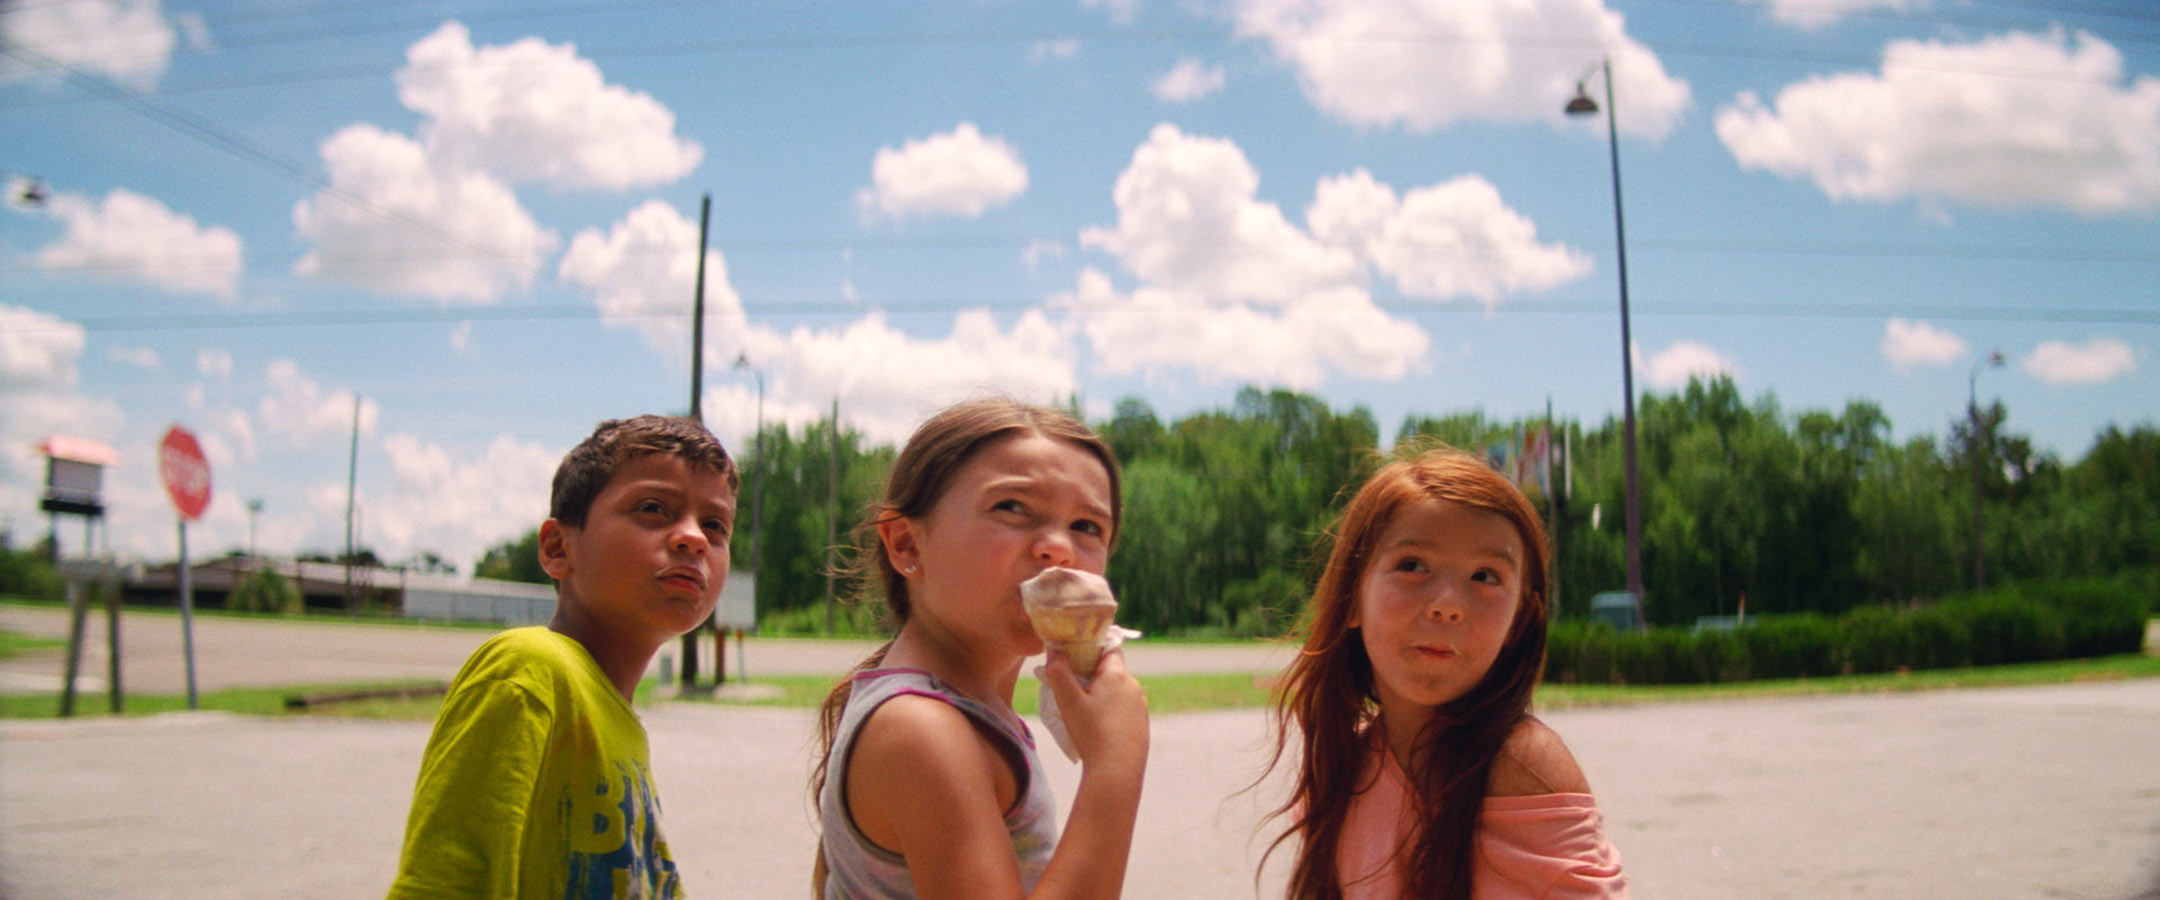 Christopher RIvera, Brooklynn Prince, and Valeria Cotto sit together with ice cream in a parking lot